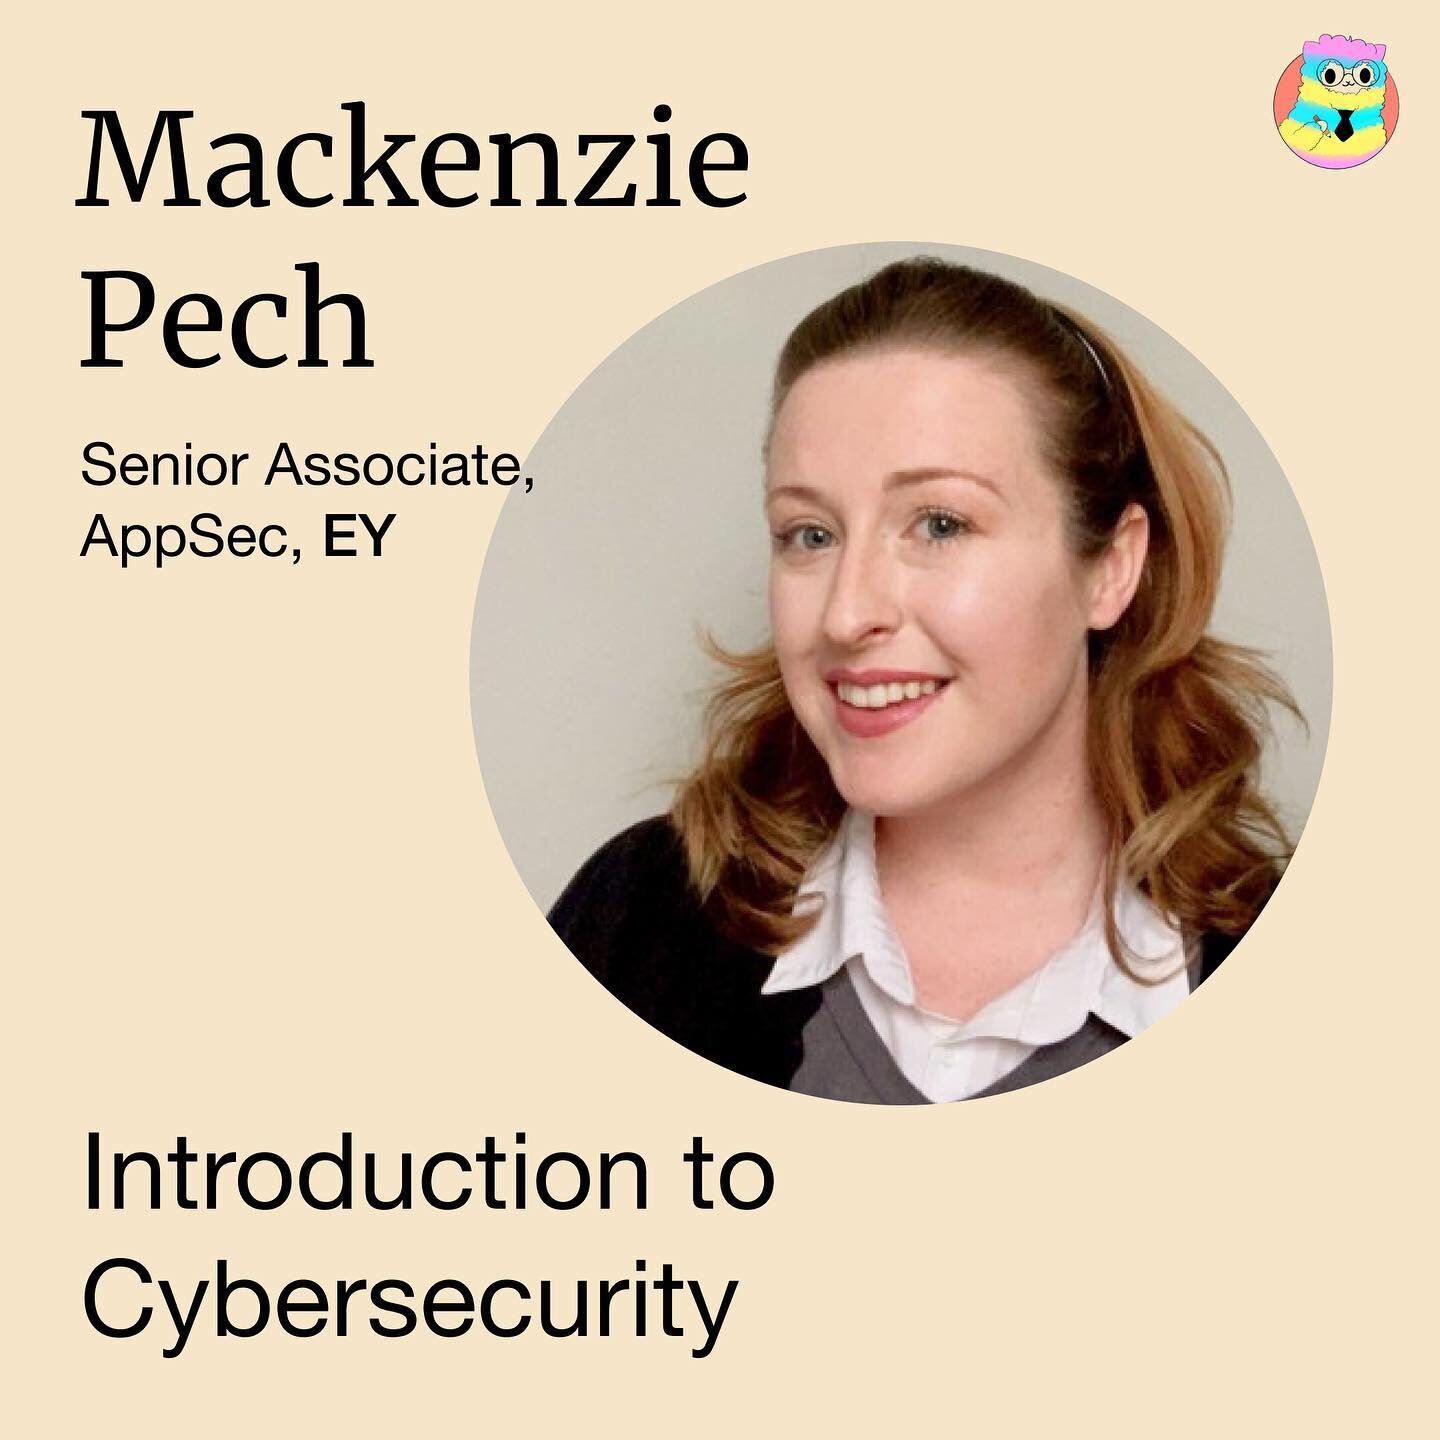 Mackenzie shared her journey to her career, cybersecurity info &amp; roles, and tips for job searching. Swipe to see our Alpacees&rsquo; takeaways.

#cybersecurity #careeradvice #careerdevelopment #tech #stem #steam #mentorship #mentorshipprogram #cu